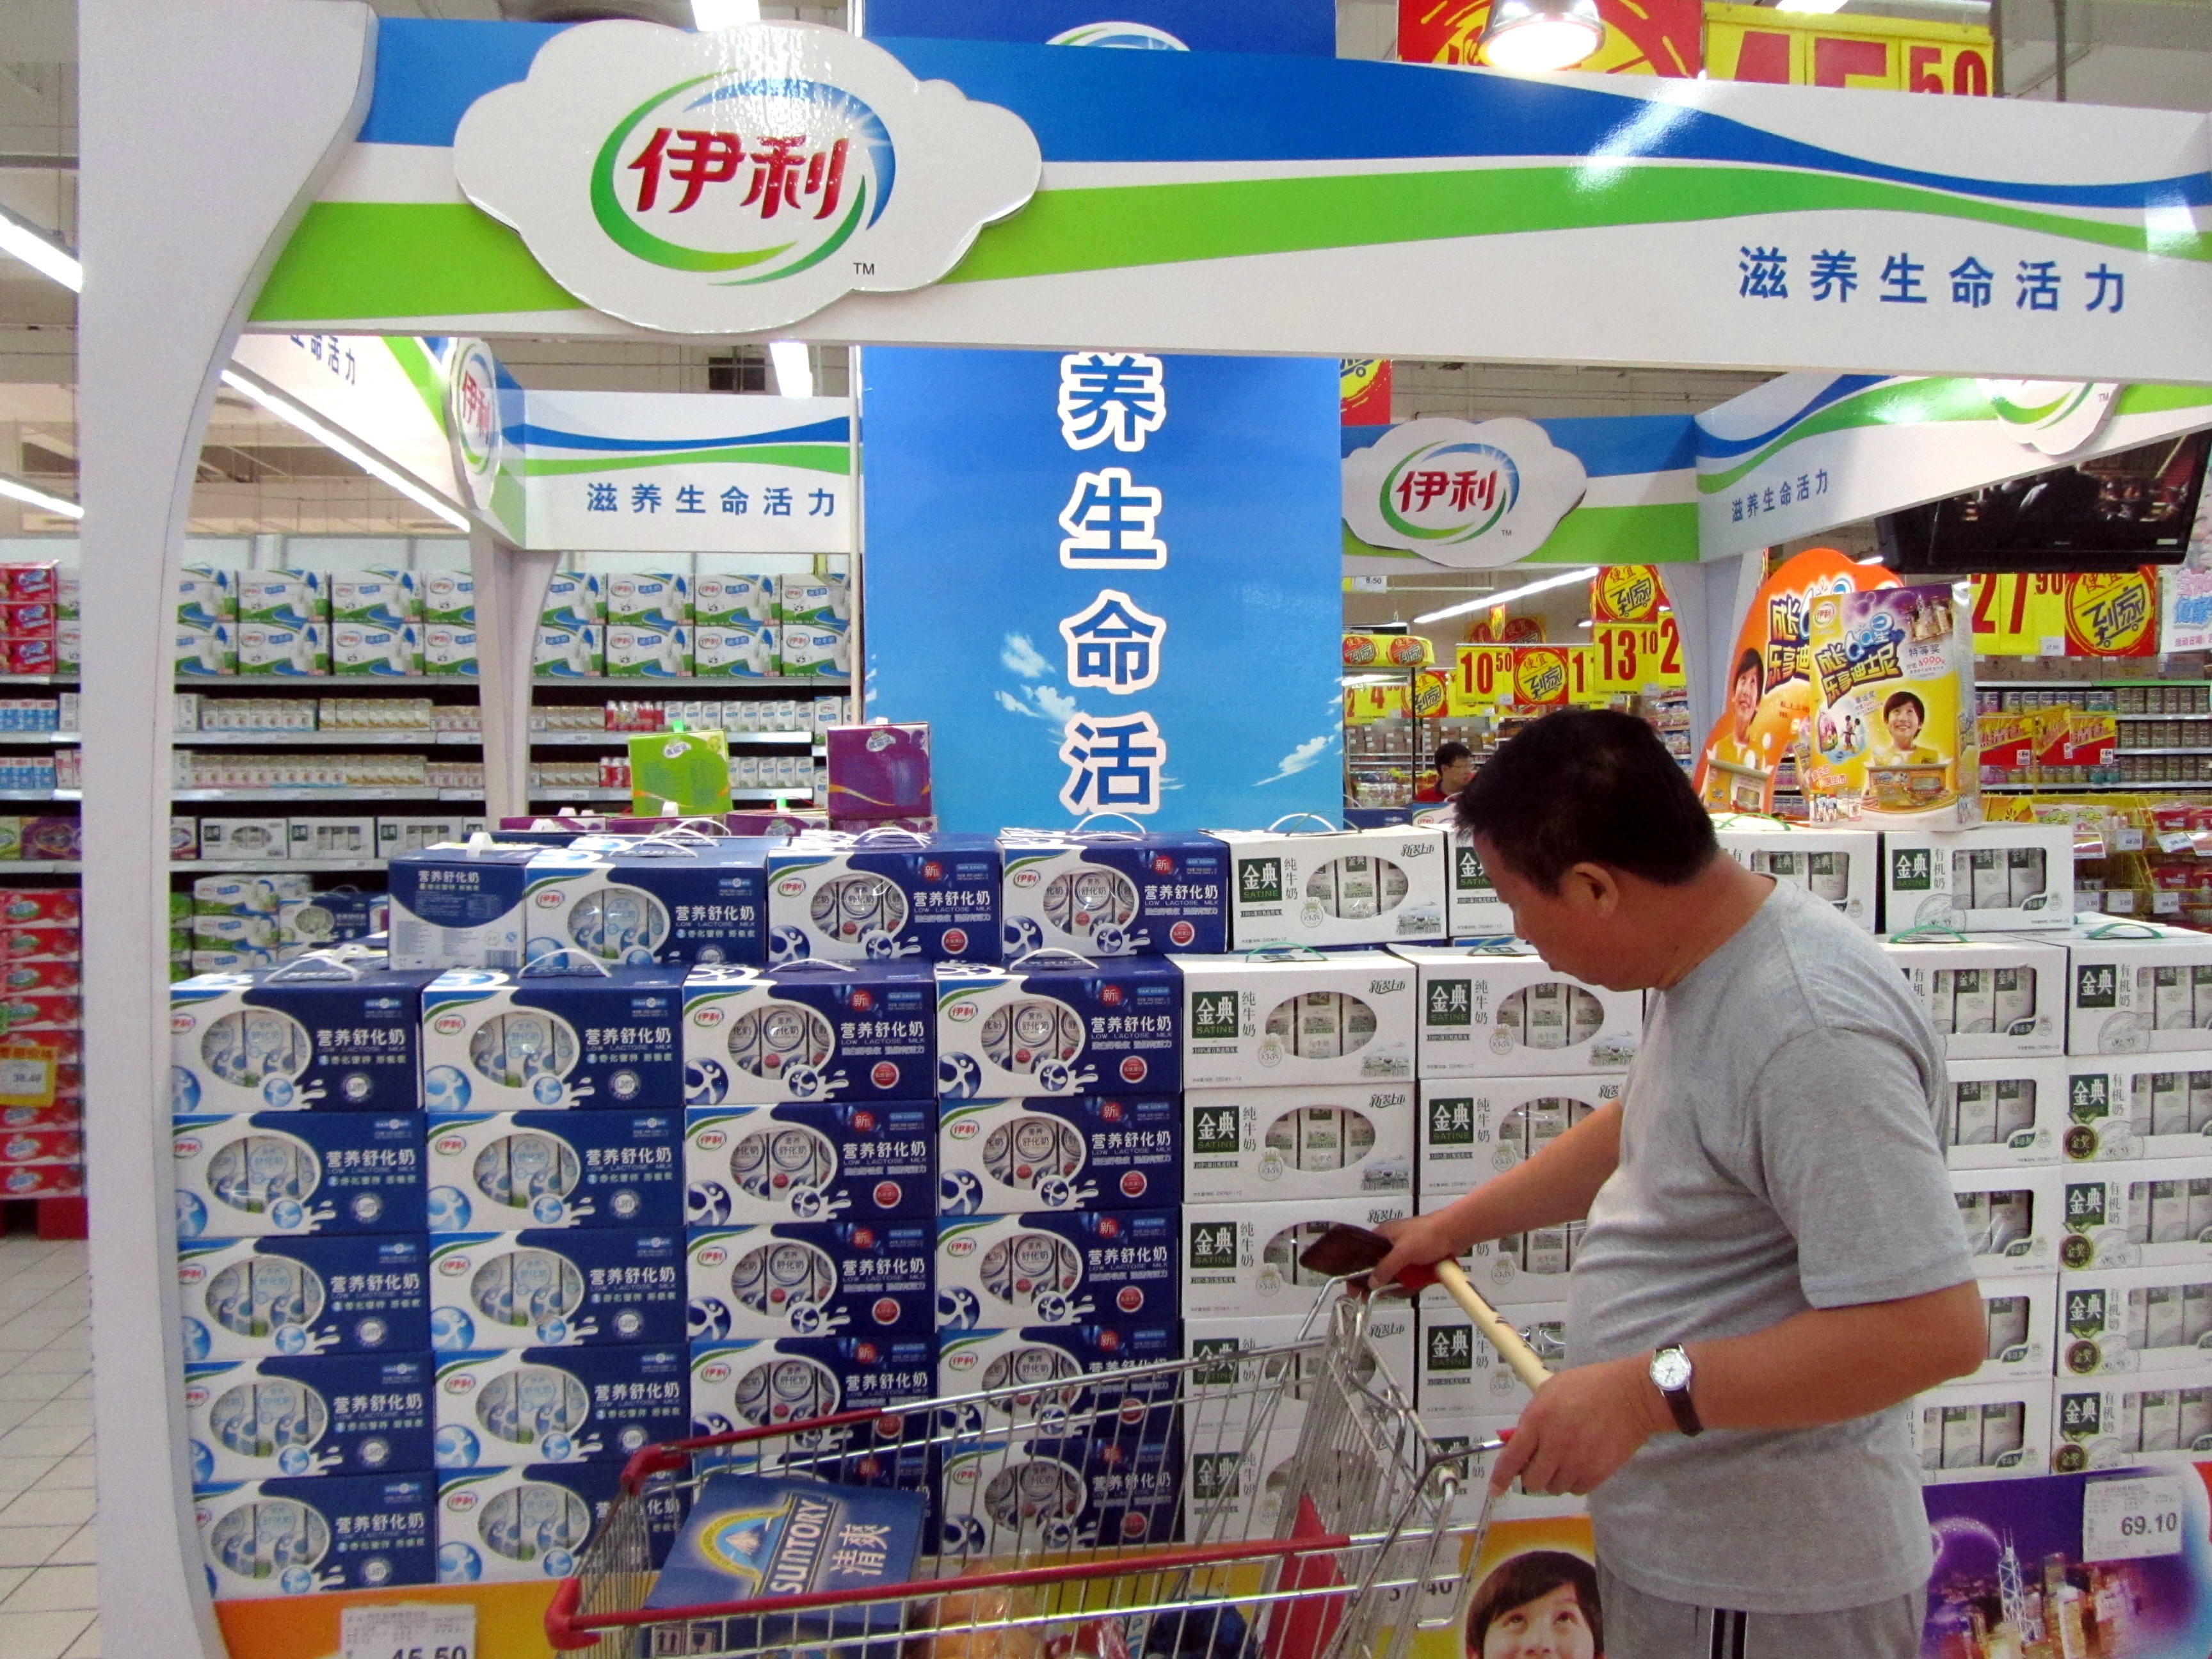 A customer is looking at Yili milk products at a market in Shanghai, China, 19 July 2011. Photo: SCMP